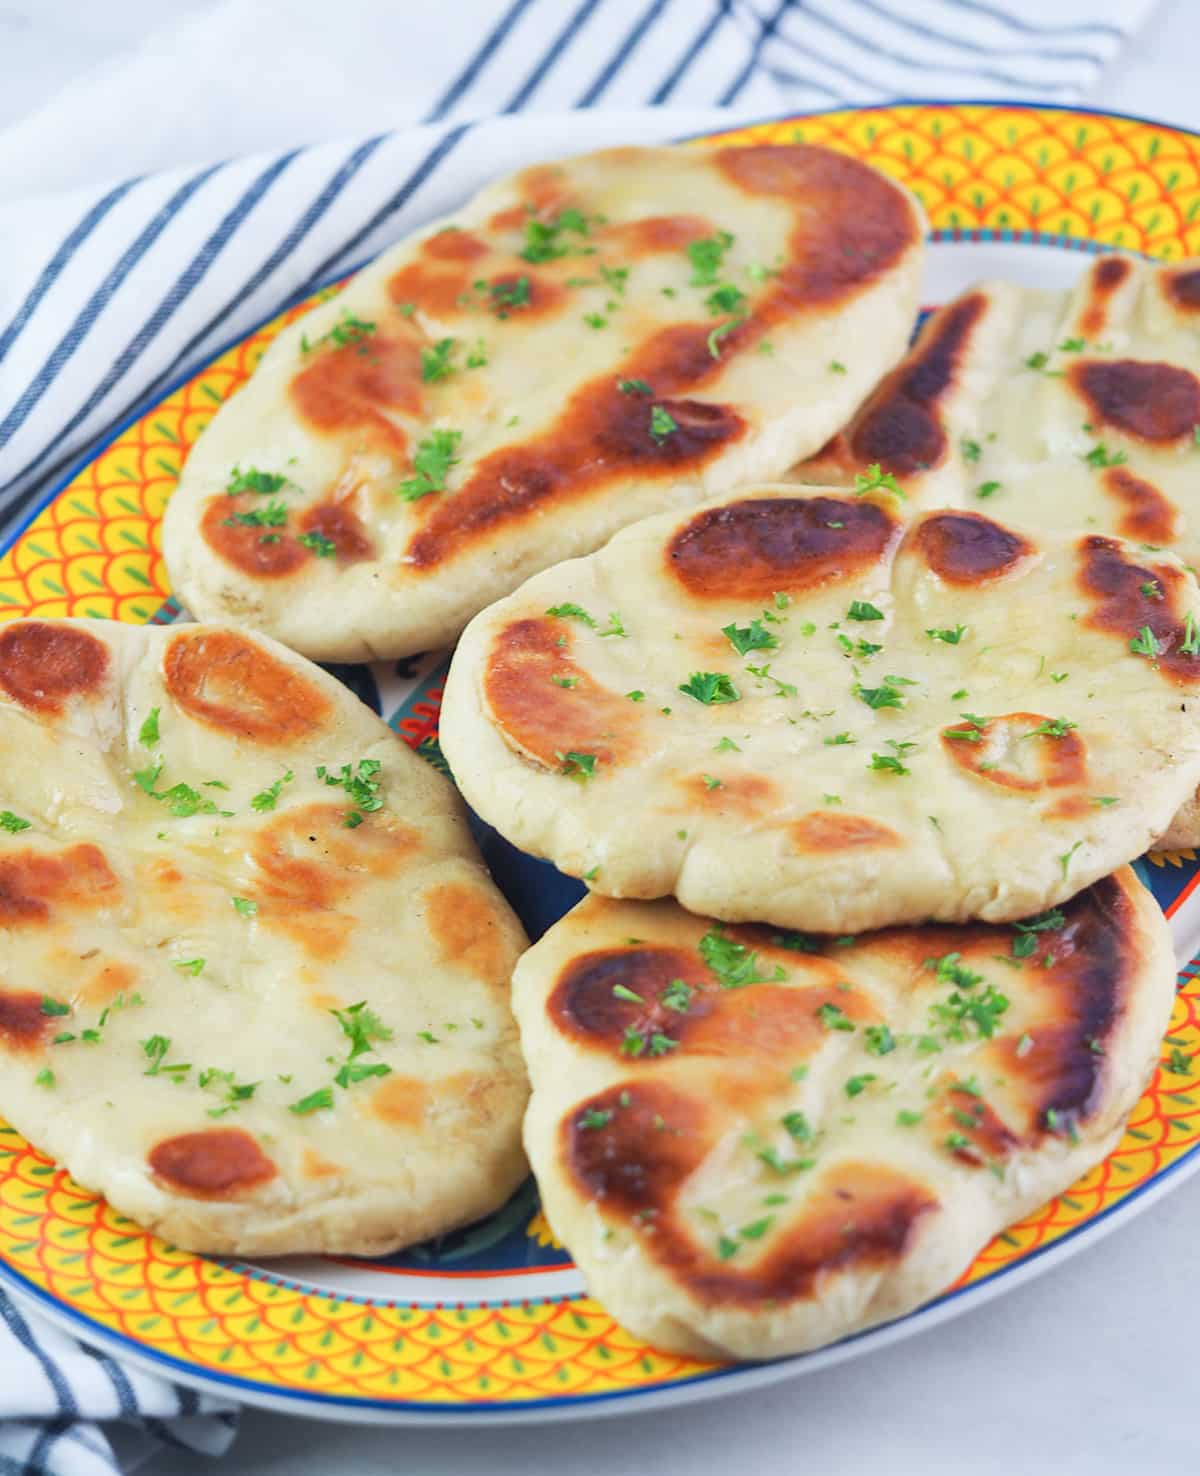 Naan bread on yellow rimmed platter with red and green scallop designs